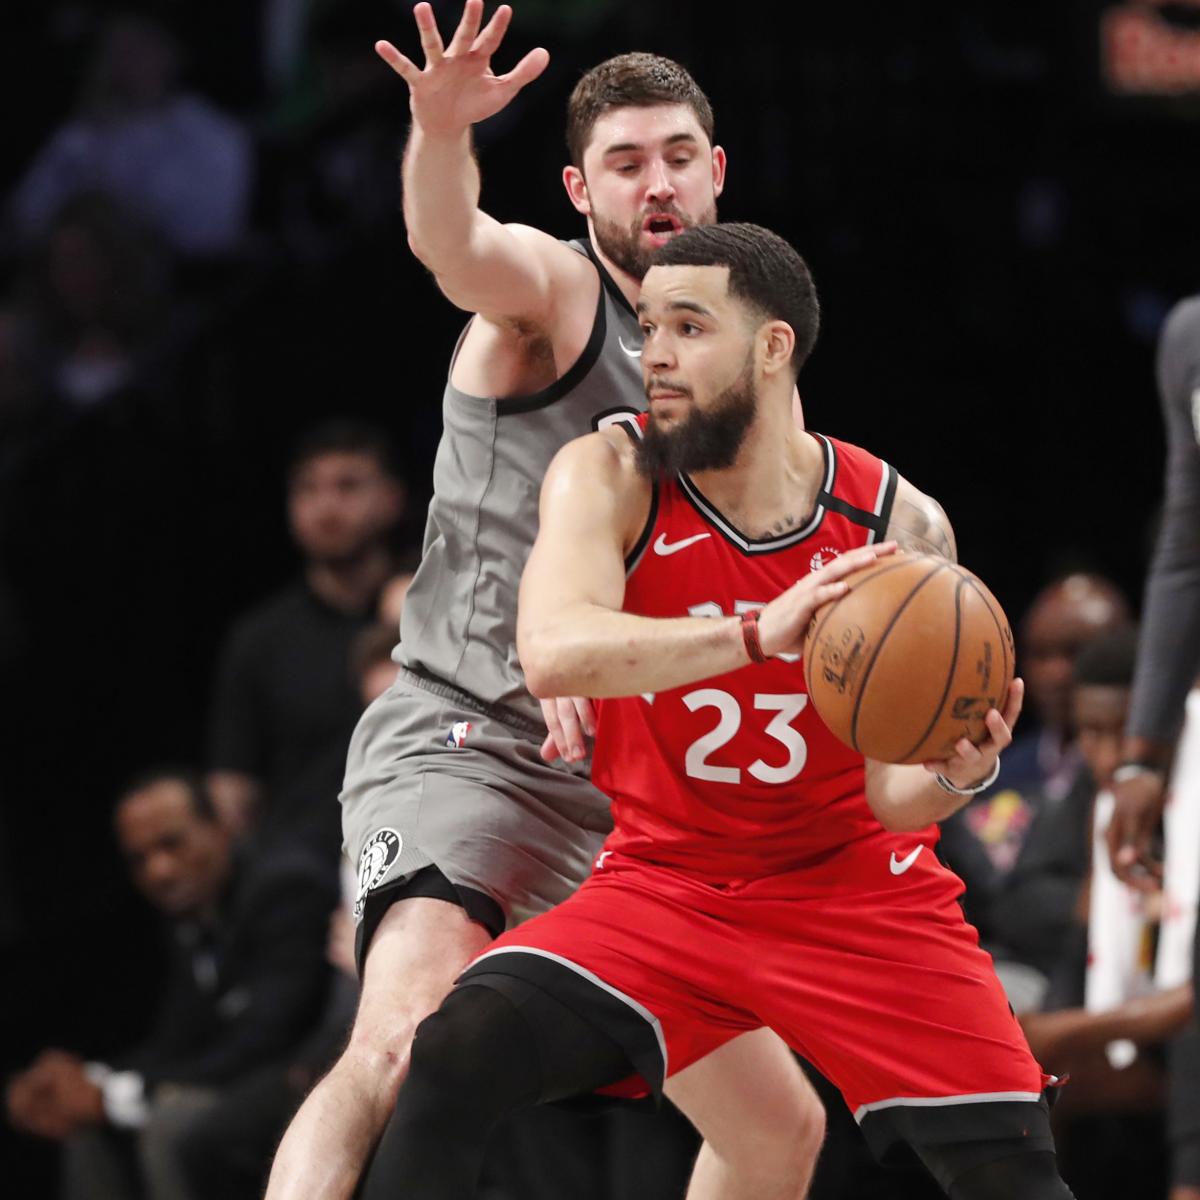 Jusuf Nurkic cares not about Markieff Morris' feelings